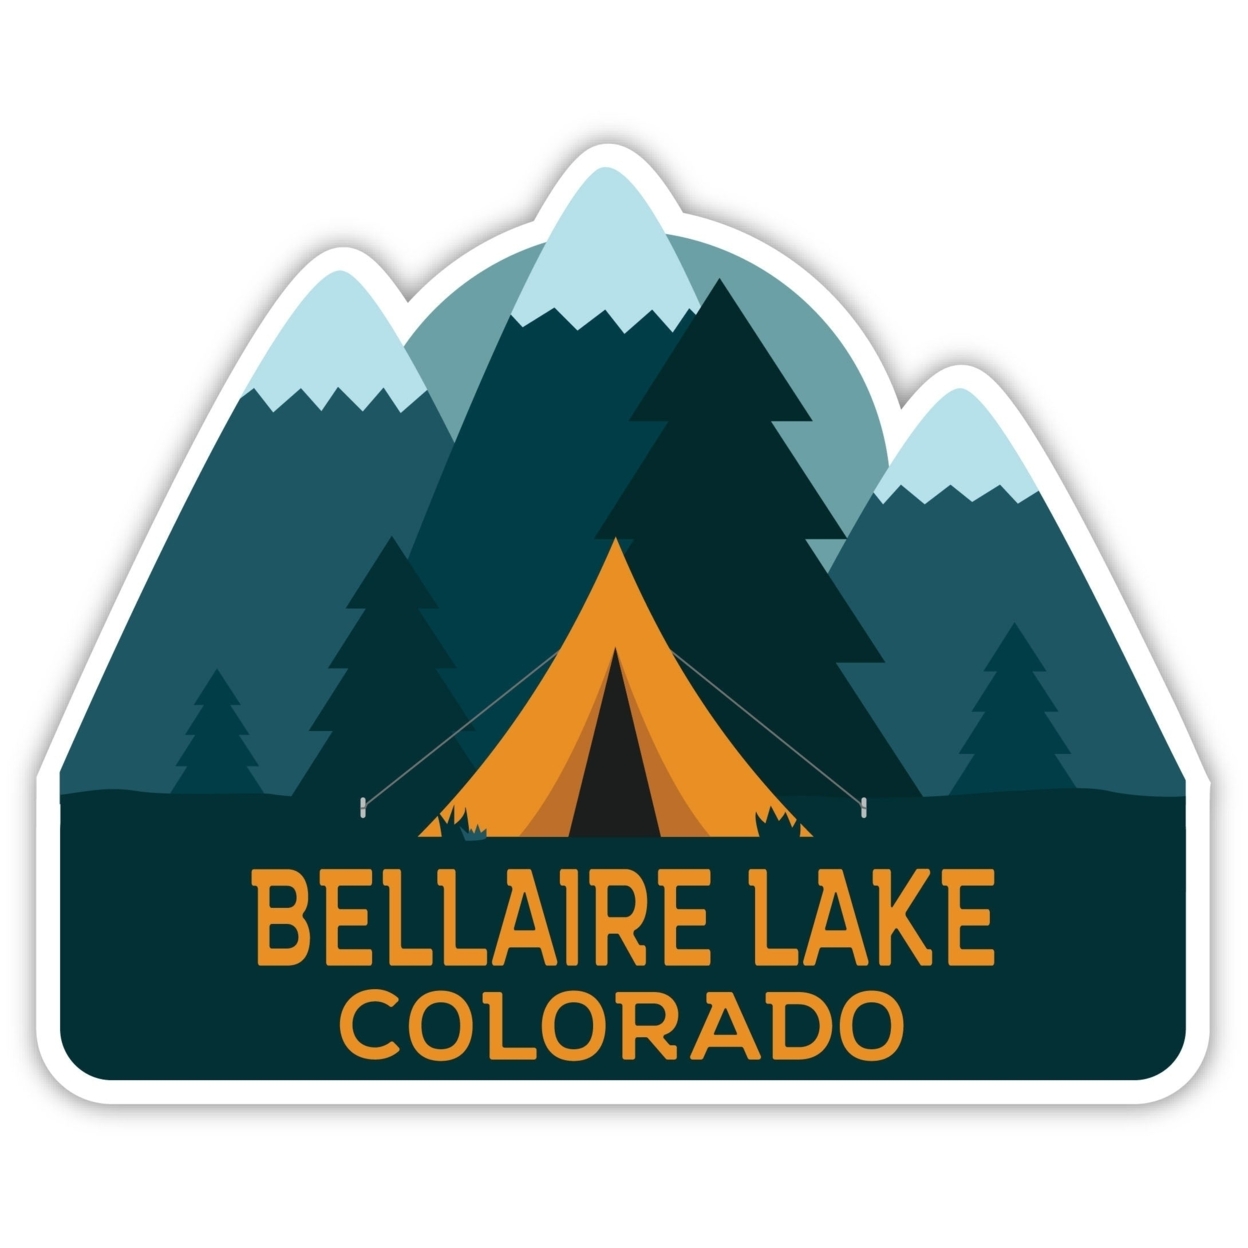 Bellaire Lake Colorado Souvenir Decorative Stickers (Choose Theme And Size) - 4-Pack, 6-Inch, Tent